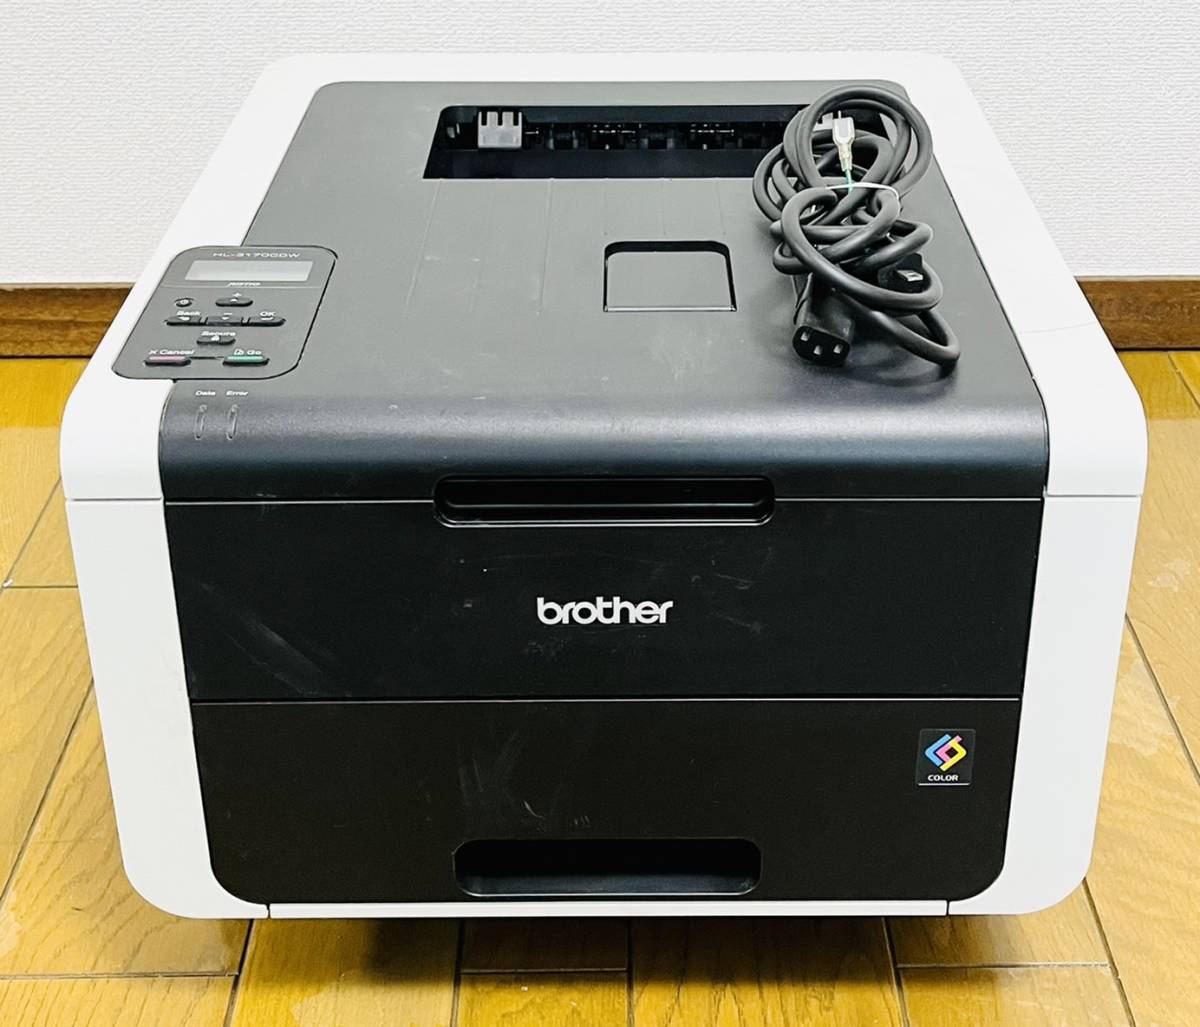 brother レーザープリンター A4 DCP-L2540DW モノクロ 複合機 JUSTIO